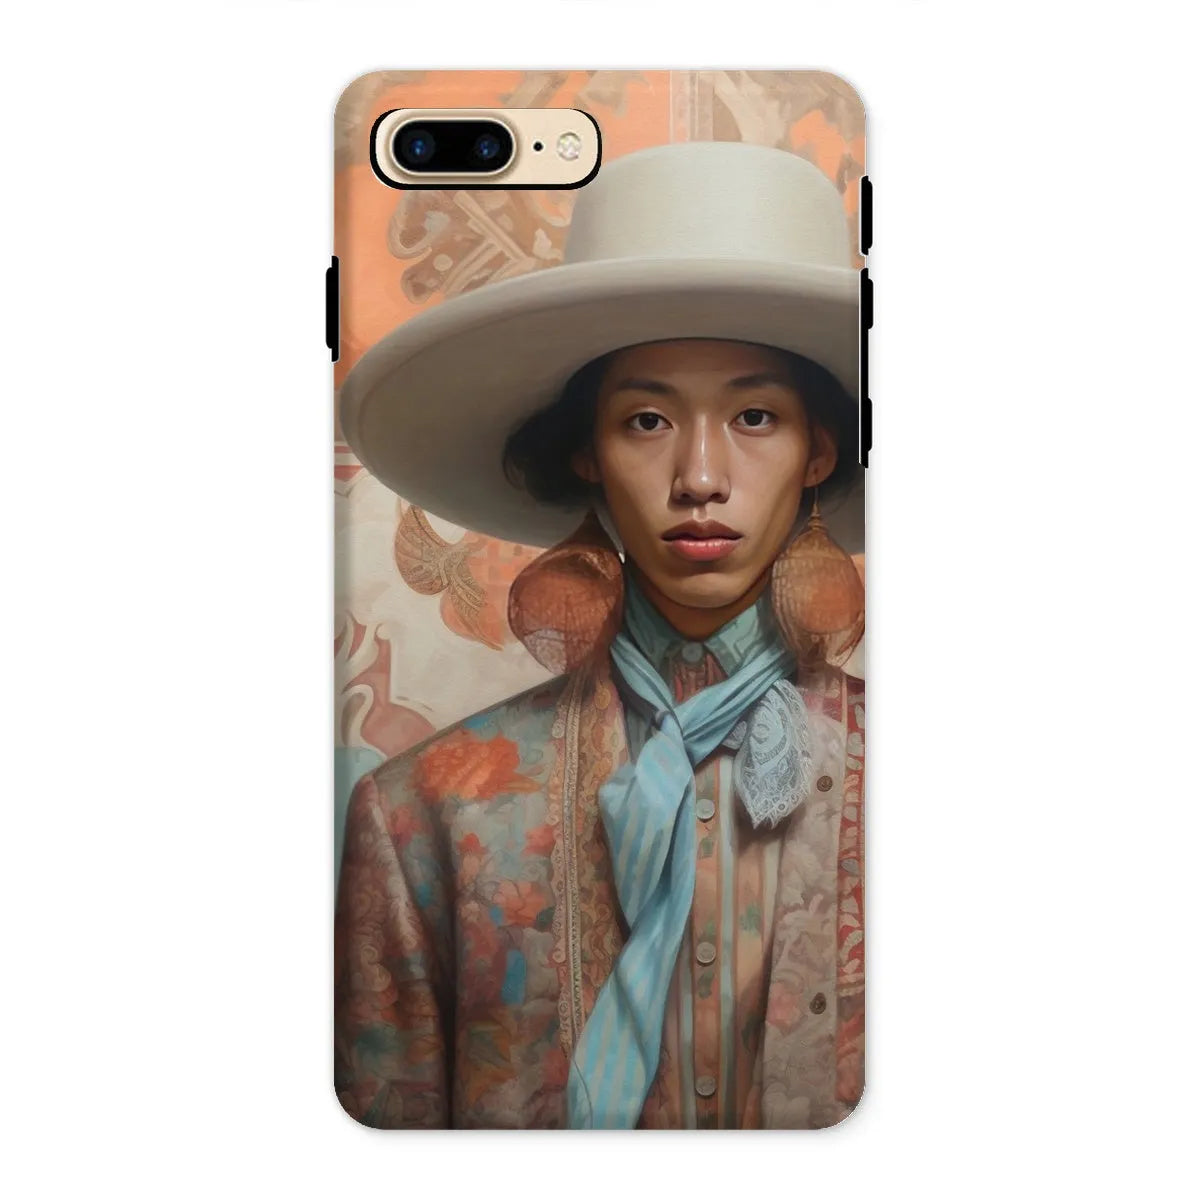 Iyaan - Gay Malay Asian Cowboy Aesthetic Art Phone Case - Iphone 8 Plus / Matte - Mobile Phone Cases - Aesthetic Art